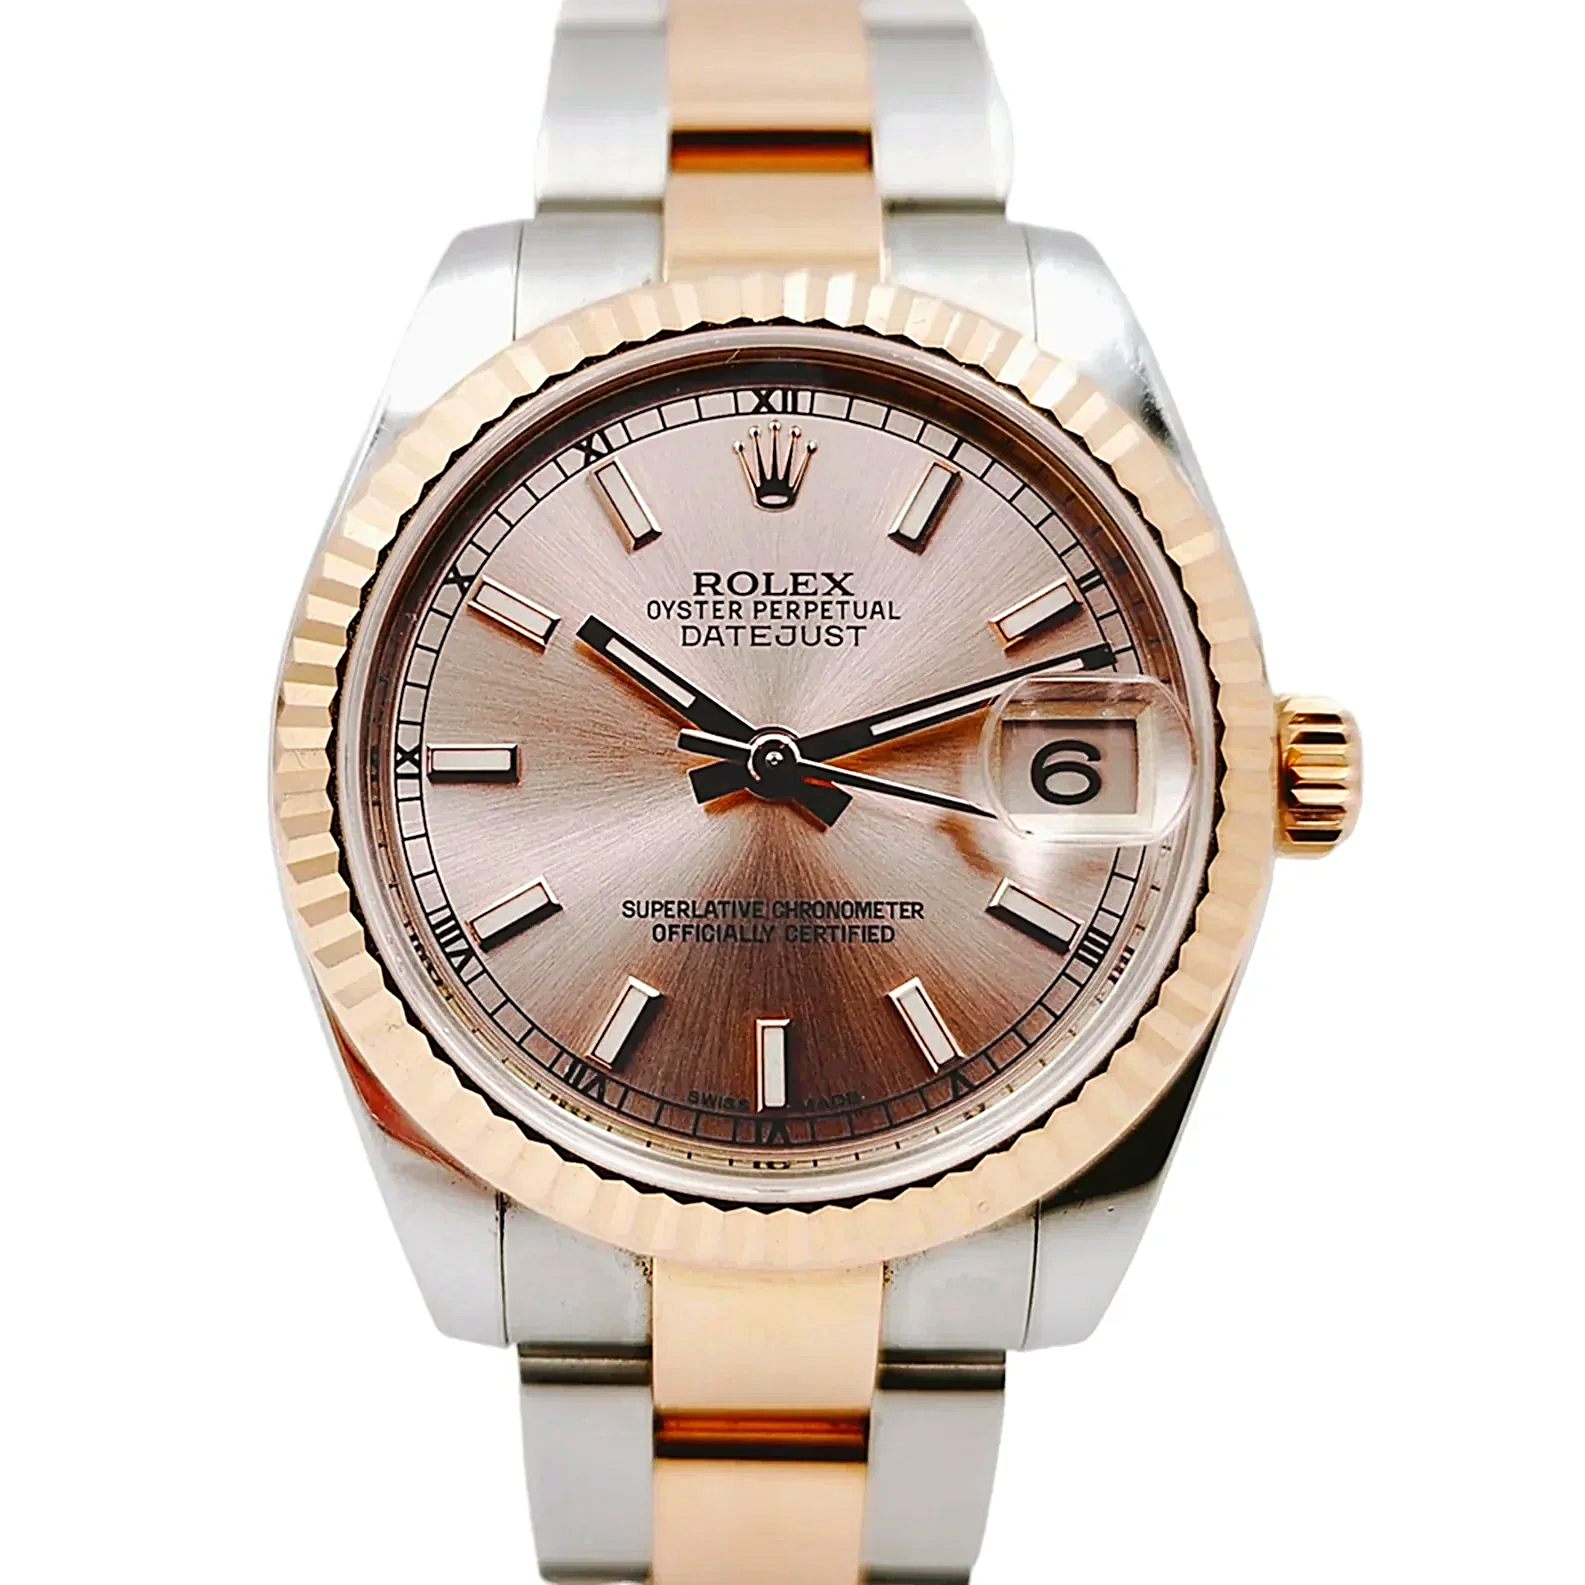 Ladies Rolex 31mm Midsize DateJust Two Tone 18K Rose Gold / Stainless Steel Watch with Pink Dial and Fluted Bezel. (Pre-Owned 178271)